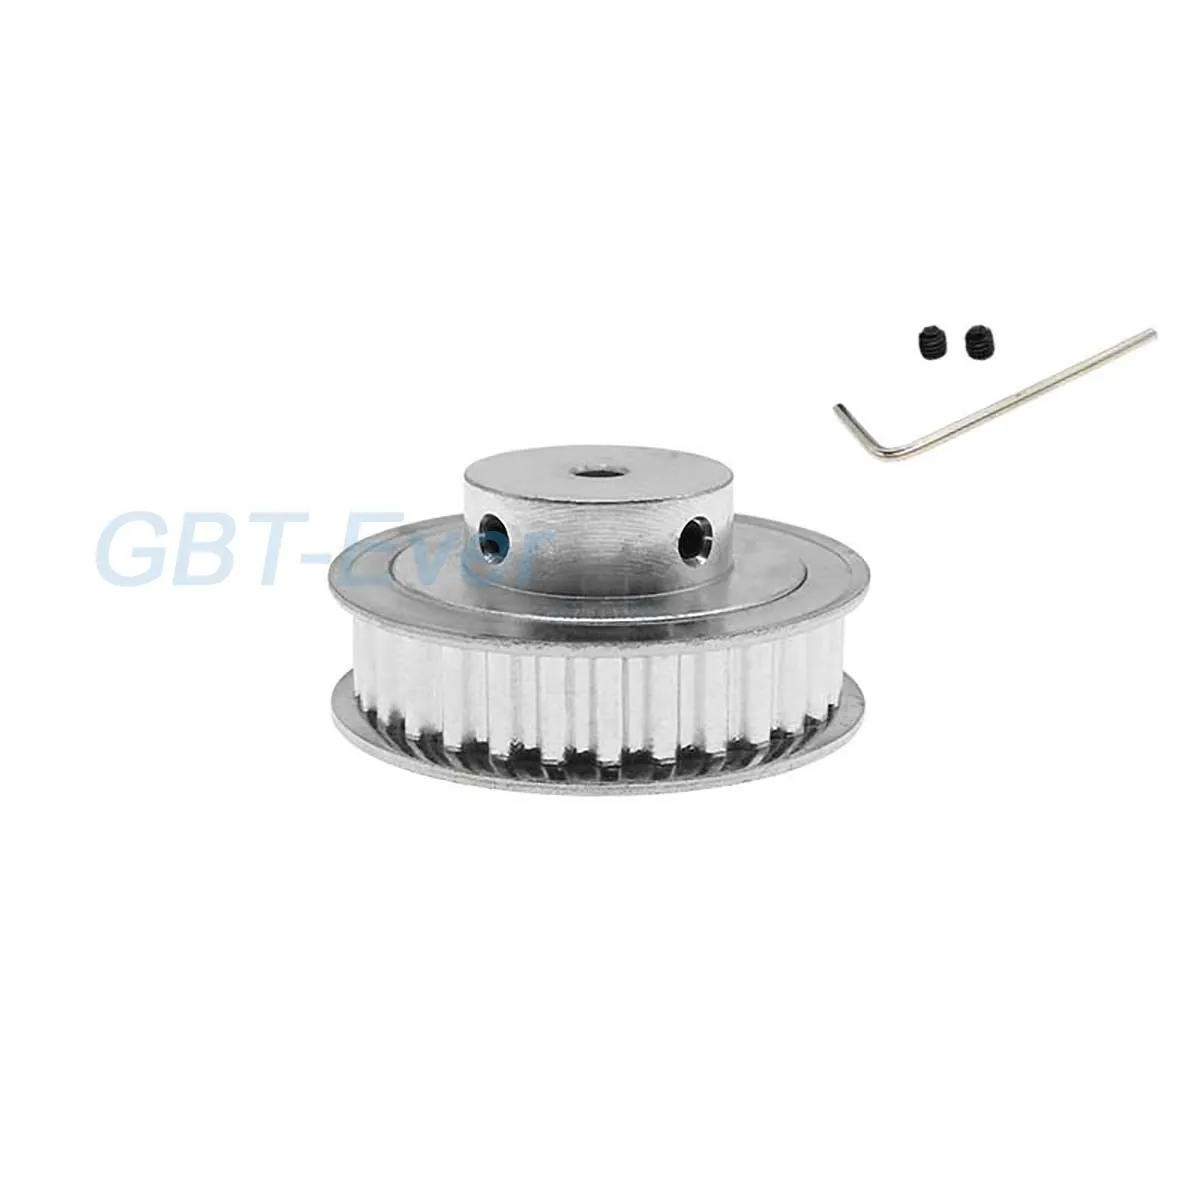 

1Pcs 40/50/60 Teeth XL Timing Pulley Bore 8/10/12mm Synchronous Wheel Aluminium Idler Pulley Pitch 5.08mm for 10mm Timing Belt